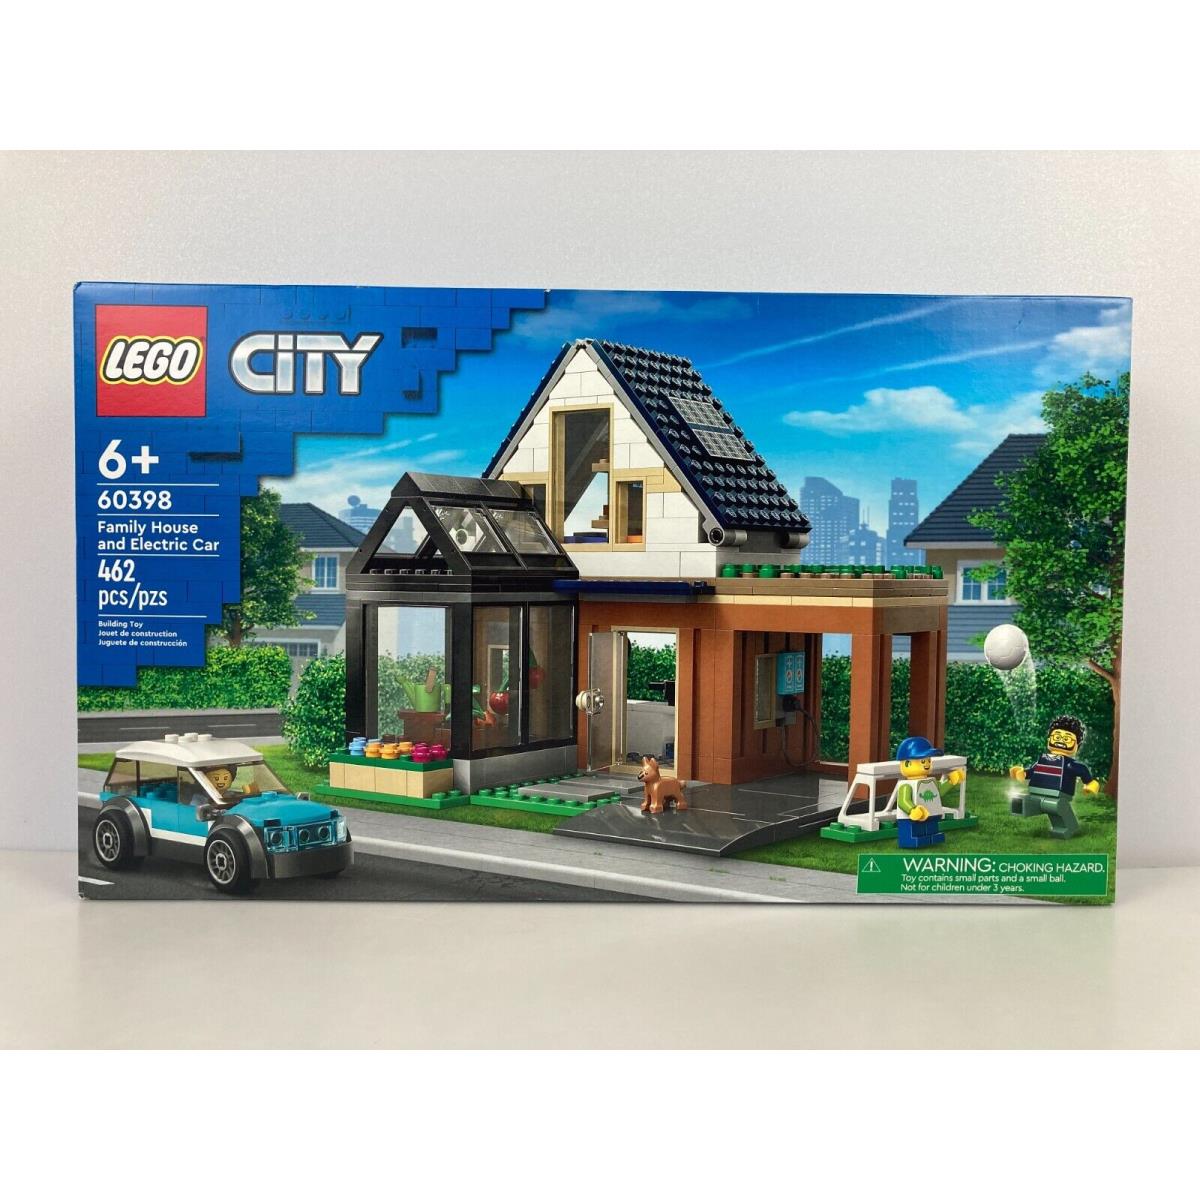 Lego City - Family House and Electric Car Building Set 60398 462Pcs